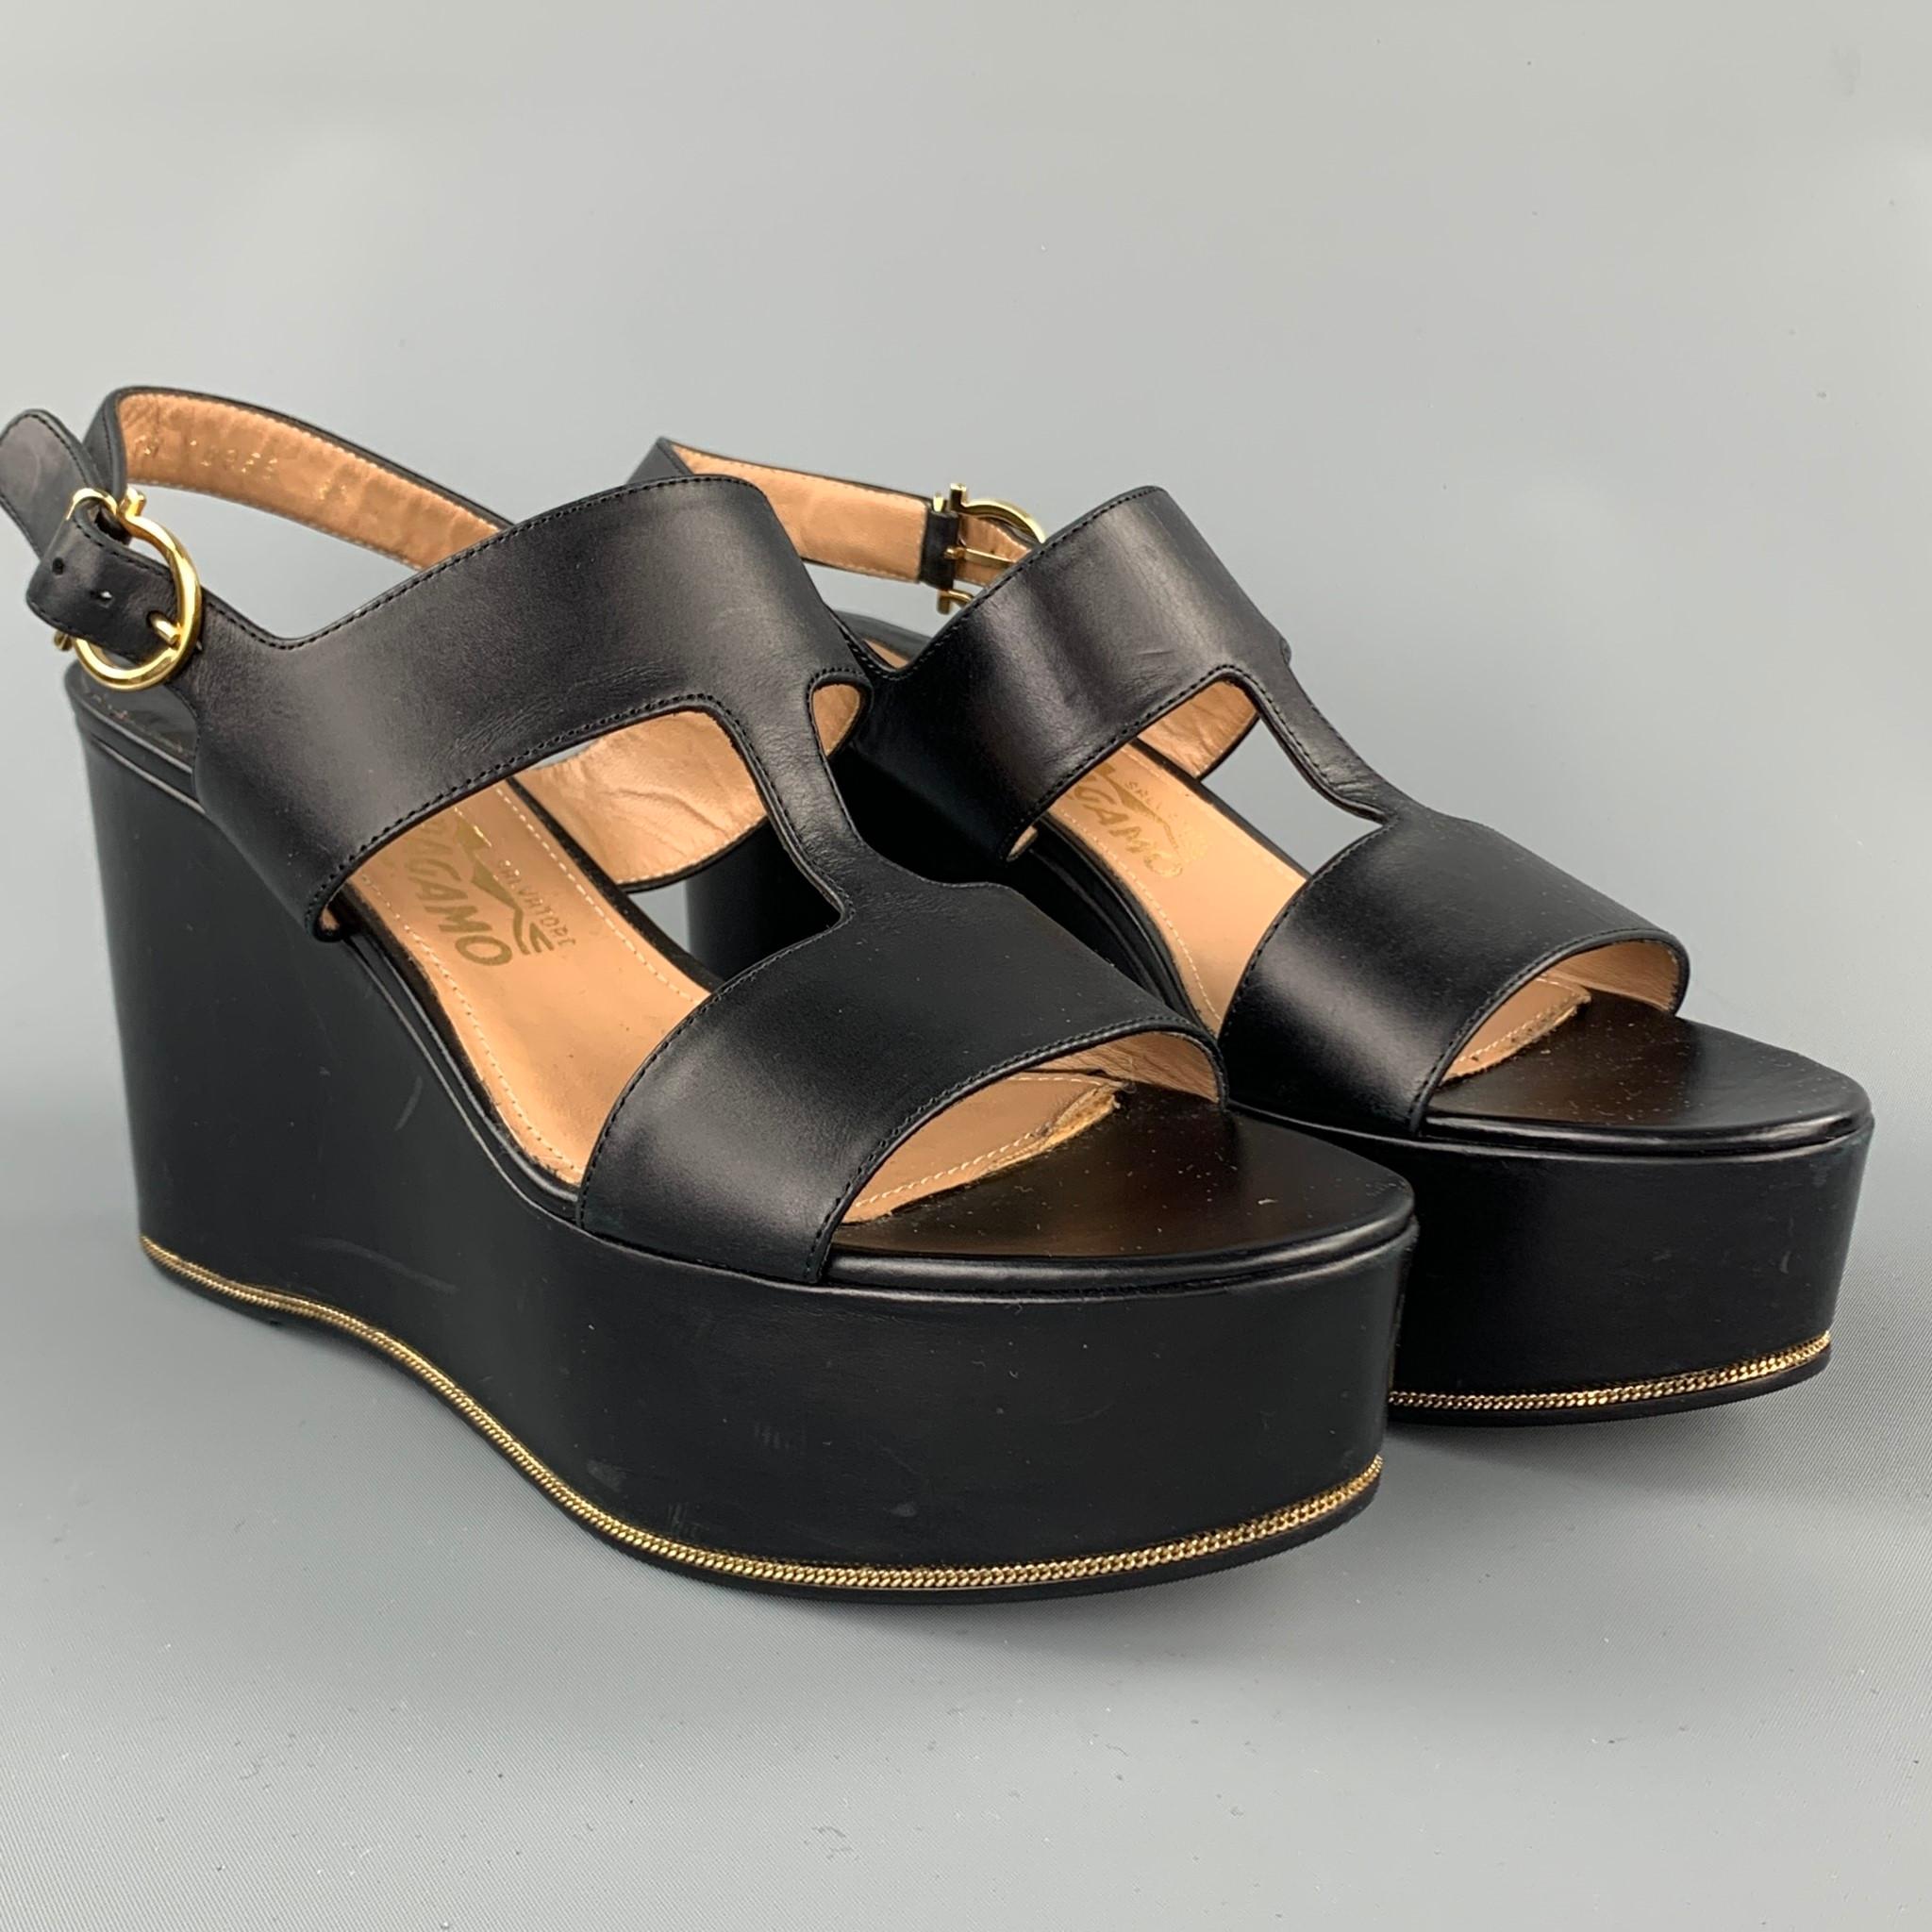 SALVATORE FERRAGAMO sandals comes in a black leather with a gold tone chain detail featuring a platform style and a strap closure. Made in Italy.

Very Good Pre-Owned Condition.
Marked: 8.5 B

Measurements:

Platform: 1.5 in. 
  
